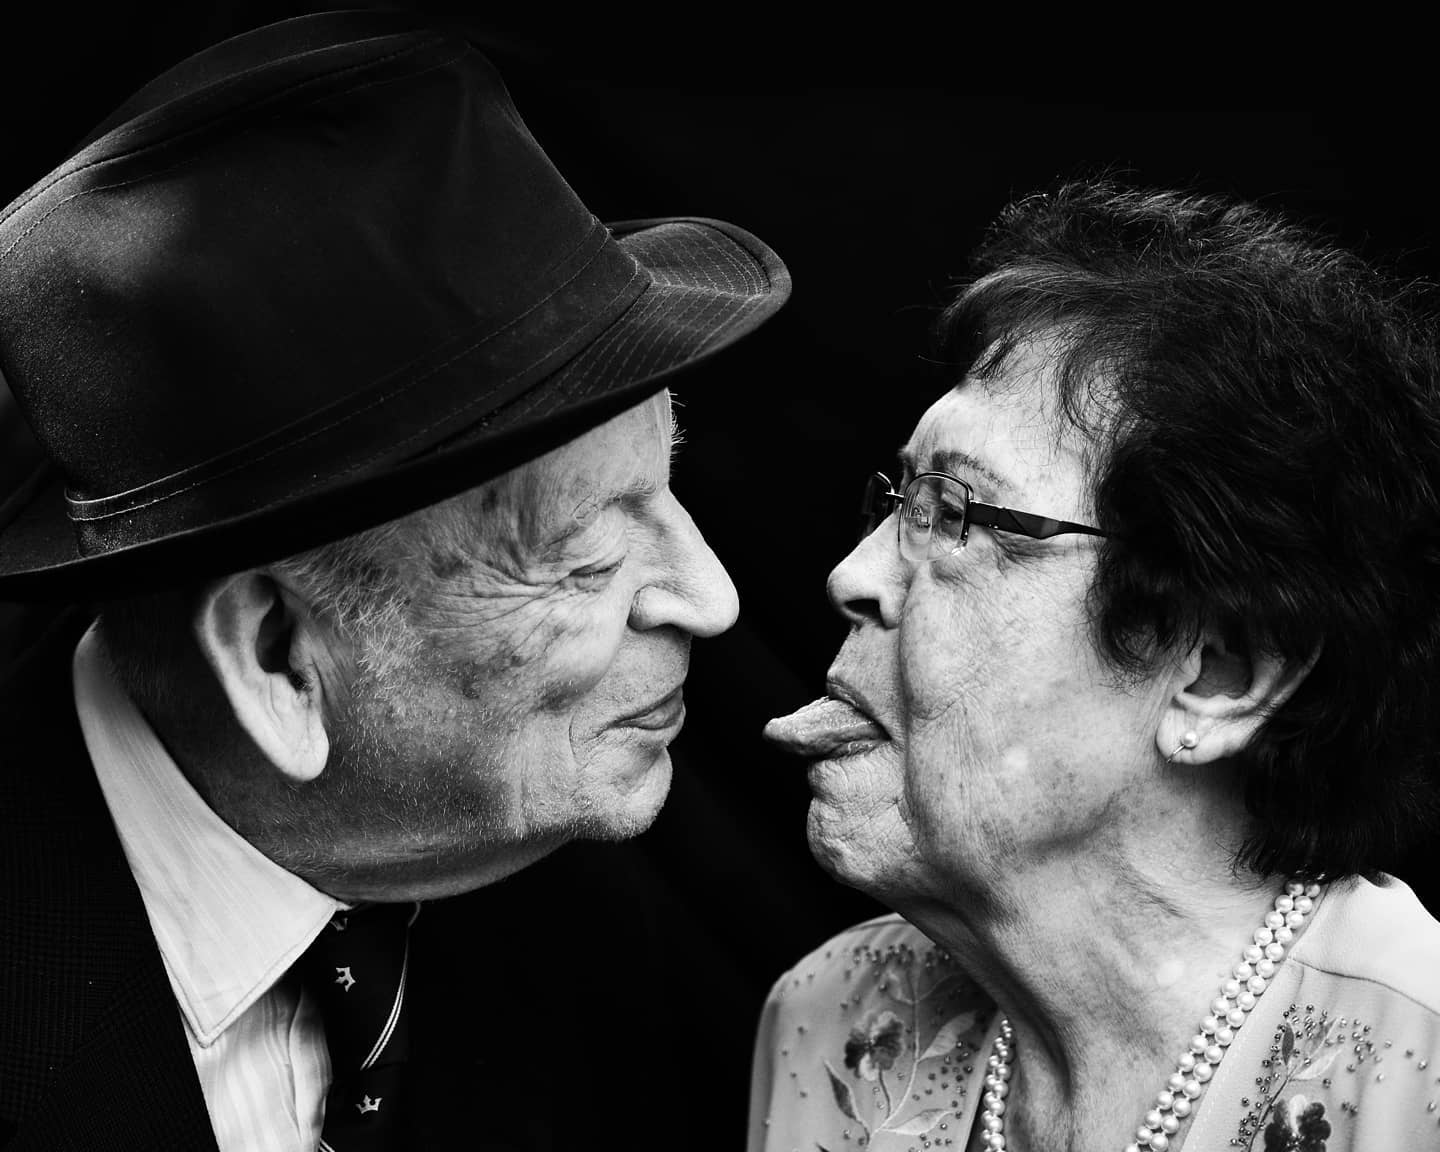 an old couple teasing each other in black and white photo